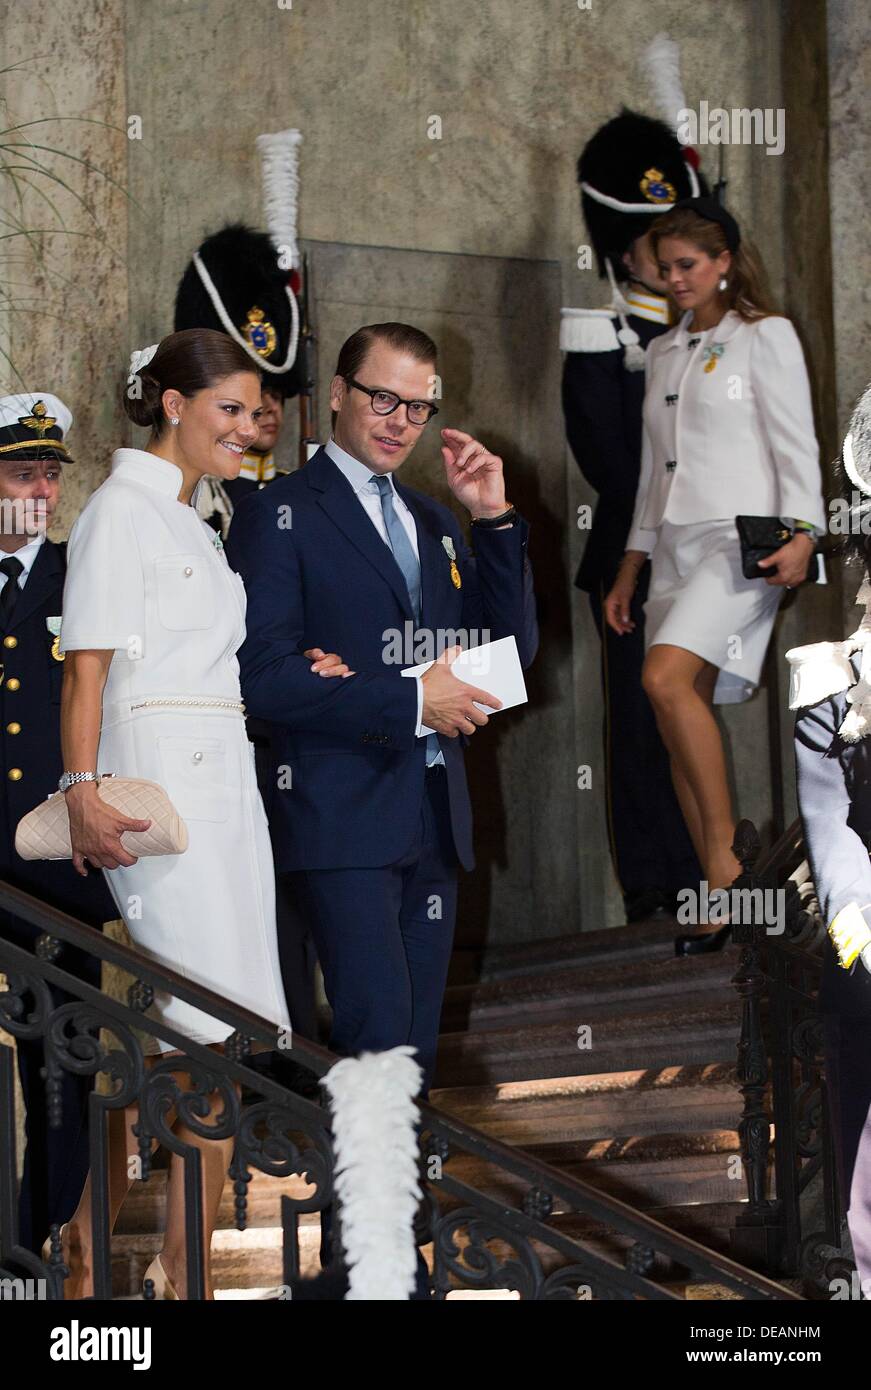 Sweden's Crown Princess Victoria and Prince Daniel attends the Te Deum thanksgiving service at the Royal Chapel in the Royal Palace, Stockholm, Sweden, 15 September 2013 to celebrate the King's 40th anniversary on the throne. Photo: RPE/ Albert Nieboer NETHERLANDS OUT Stock Photo